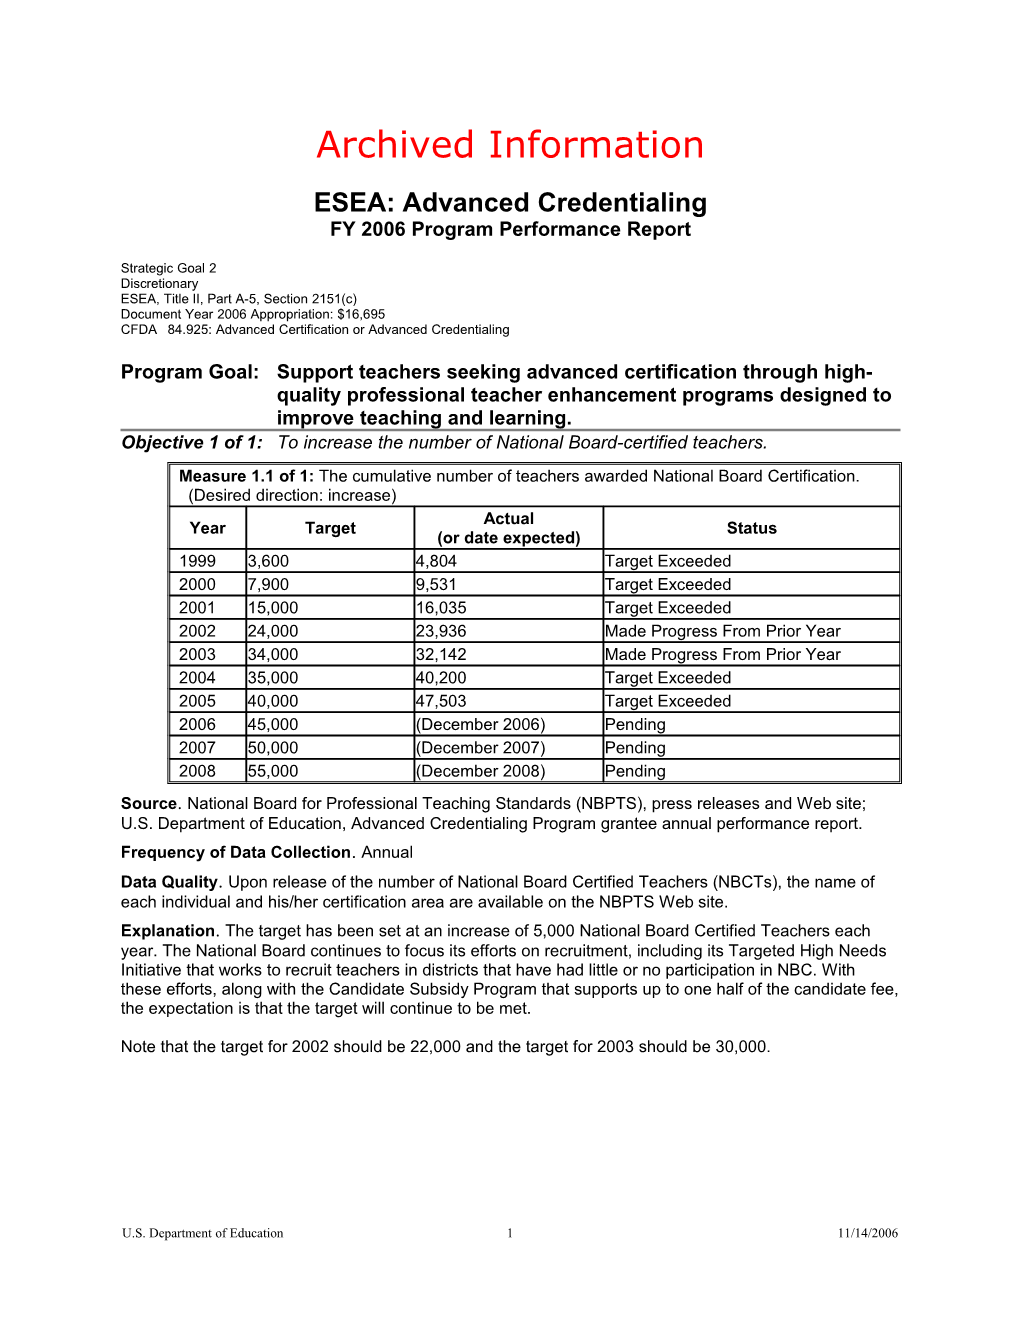 Archived: ESEA: Advanced Credentialing FY 2006 Program Performance Report (MS Word)